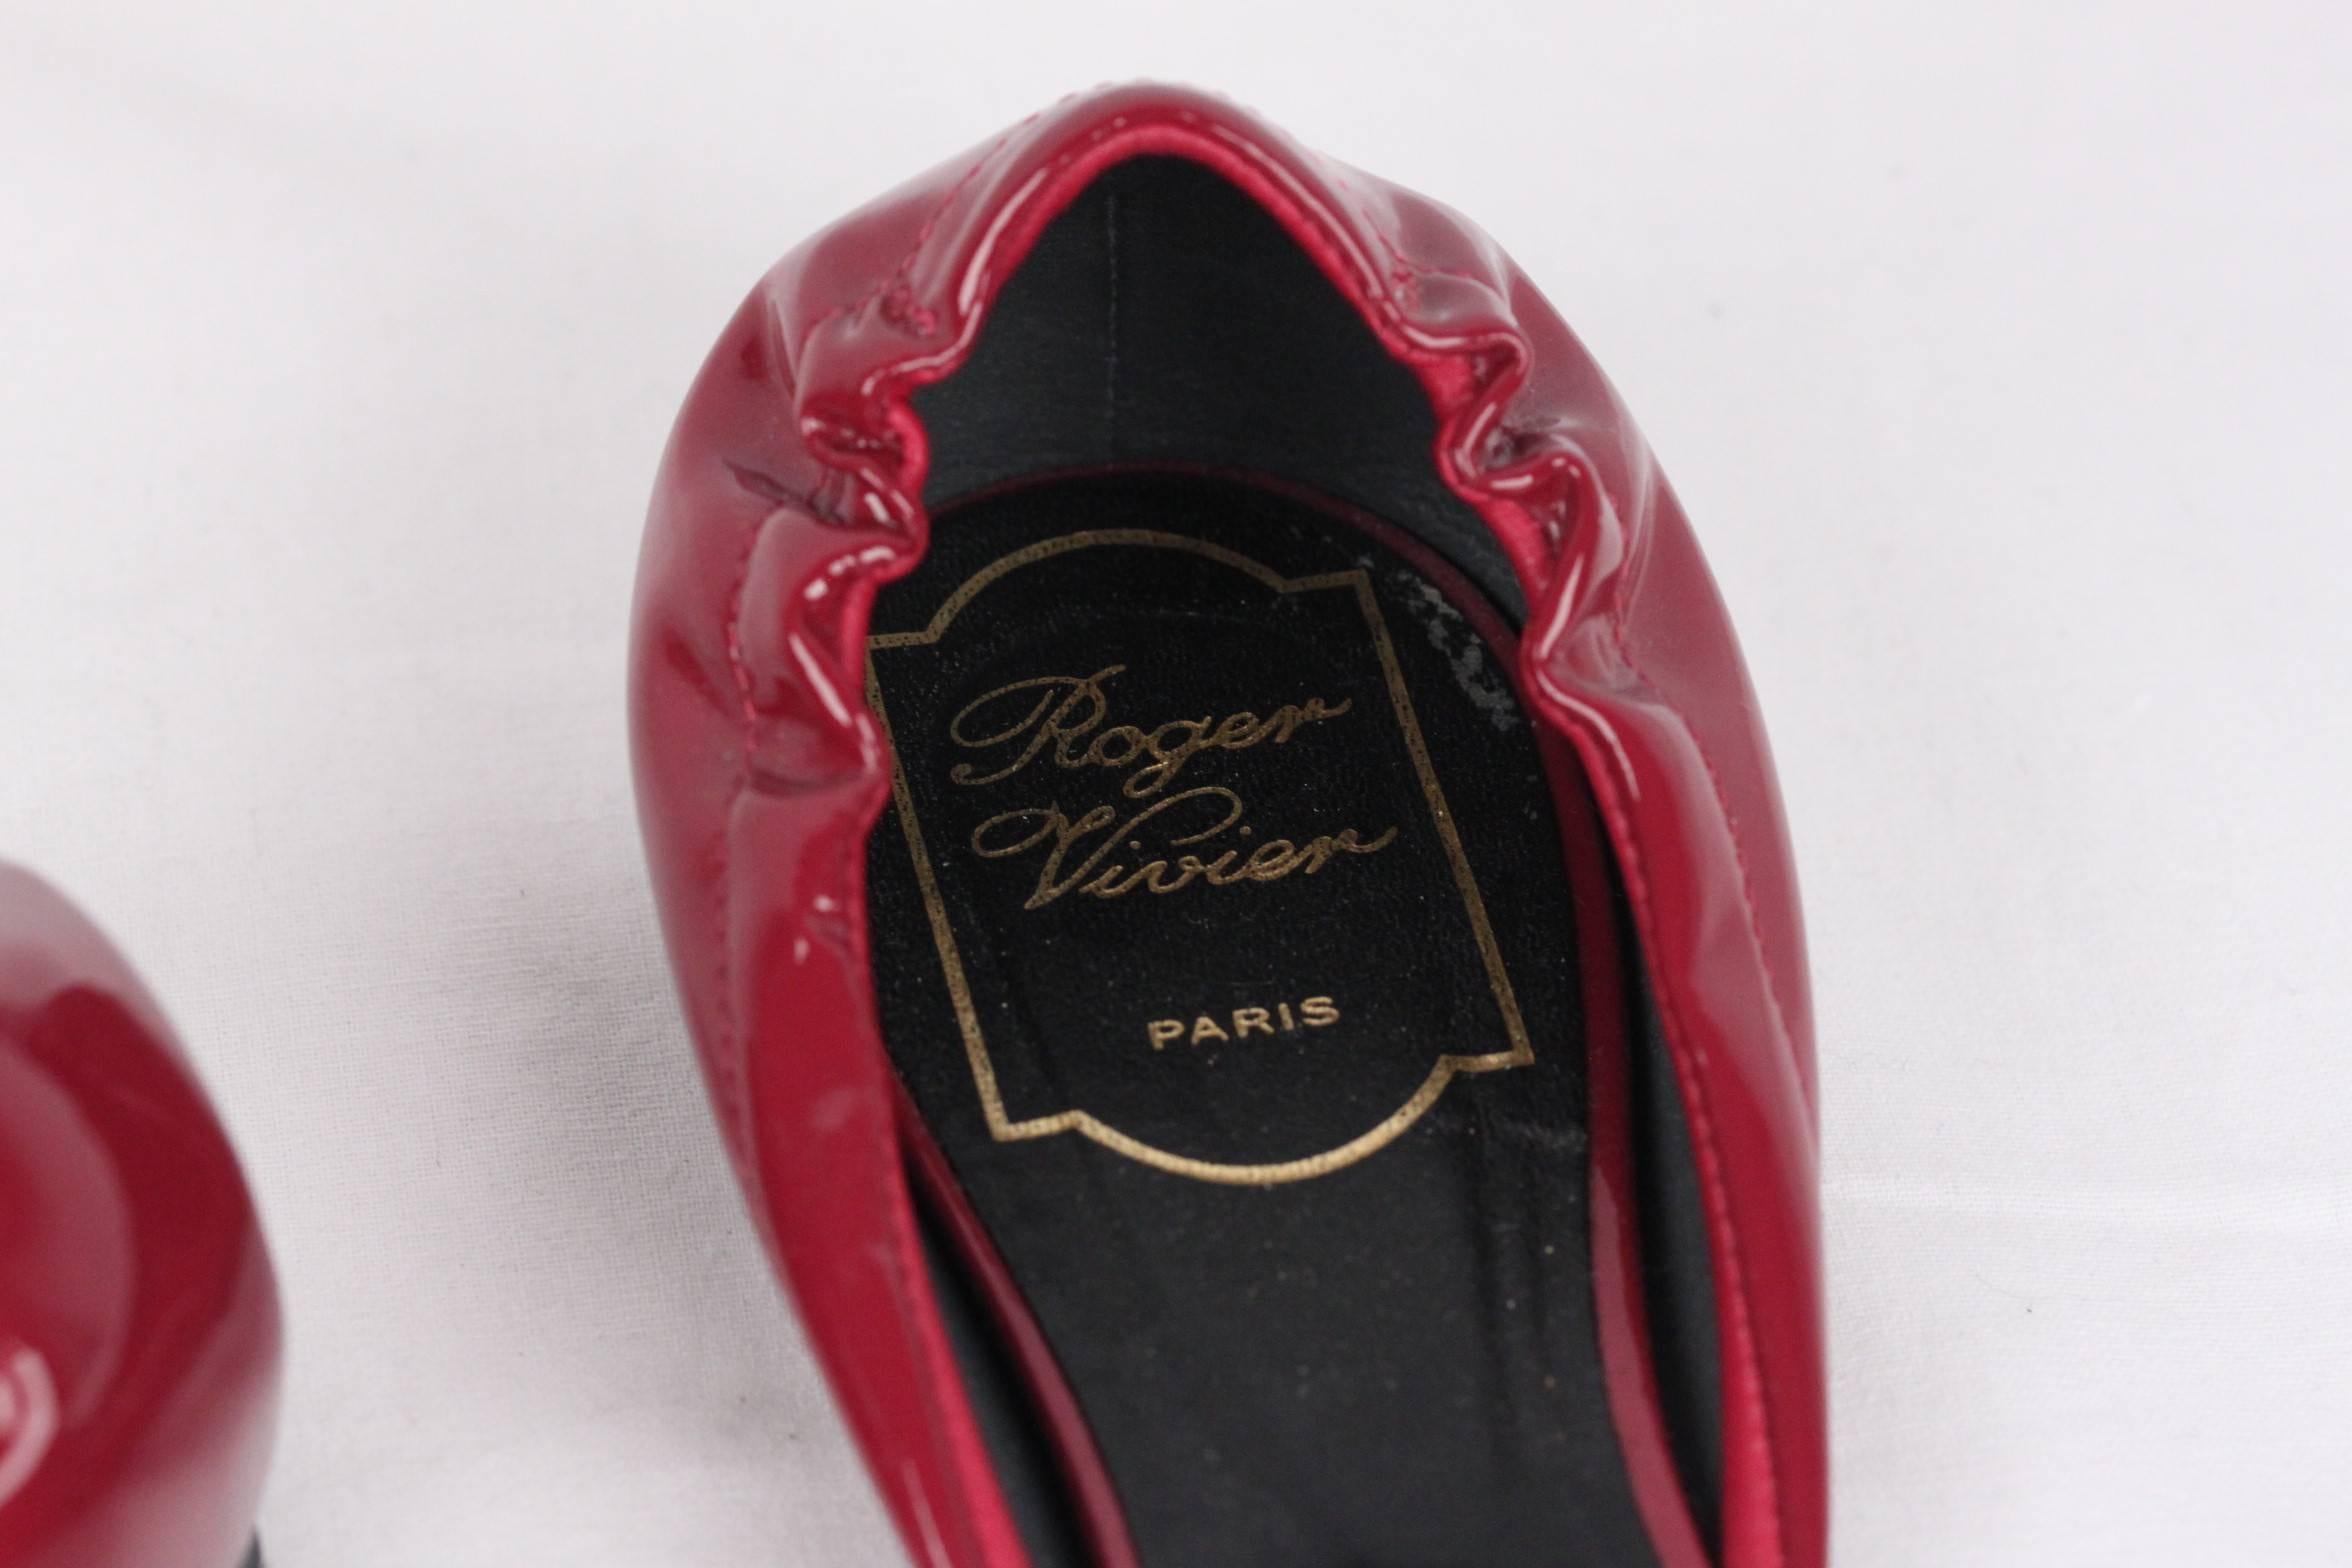 Brown ROGER VIVIER Burgundy Patent Leather CUT OUT BALLERINA Flat Shoes SIZE 38